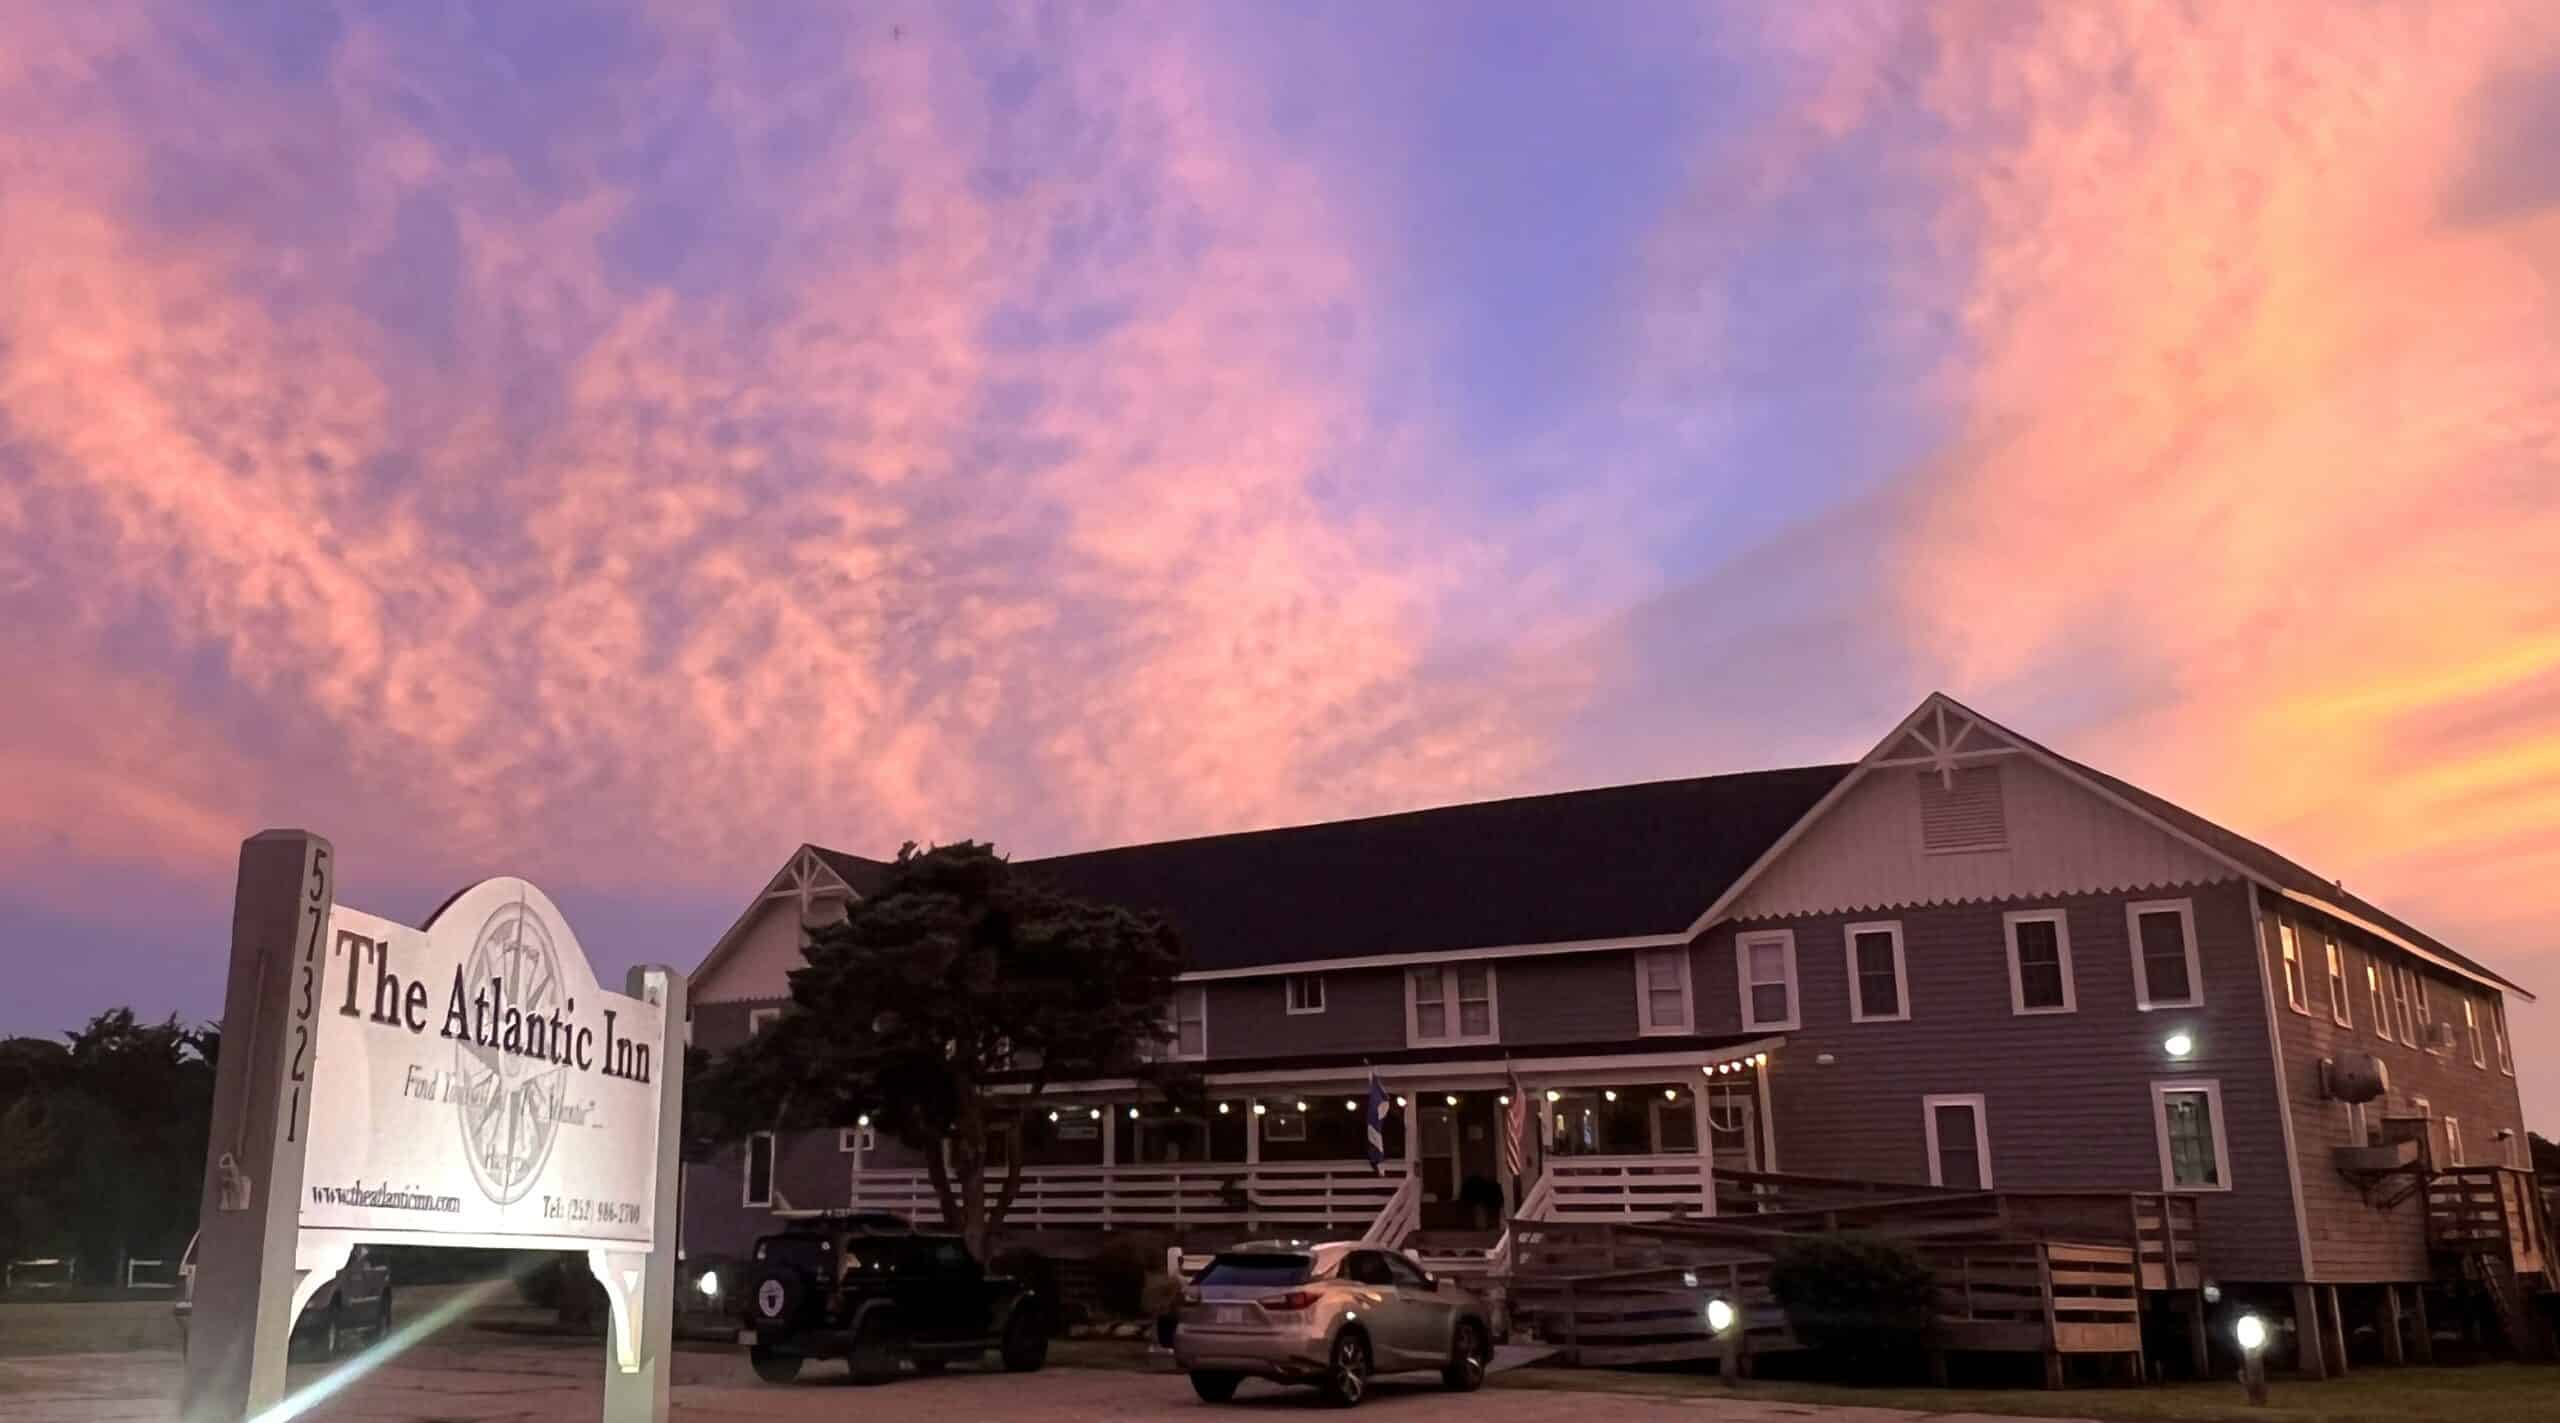 Sunset view of the Atlantic Inn for sale in North Carolina